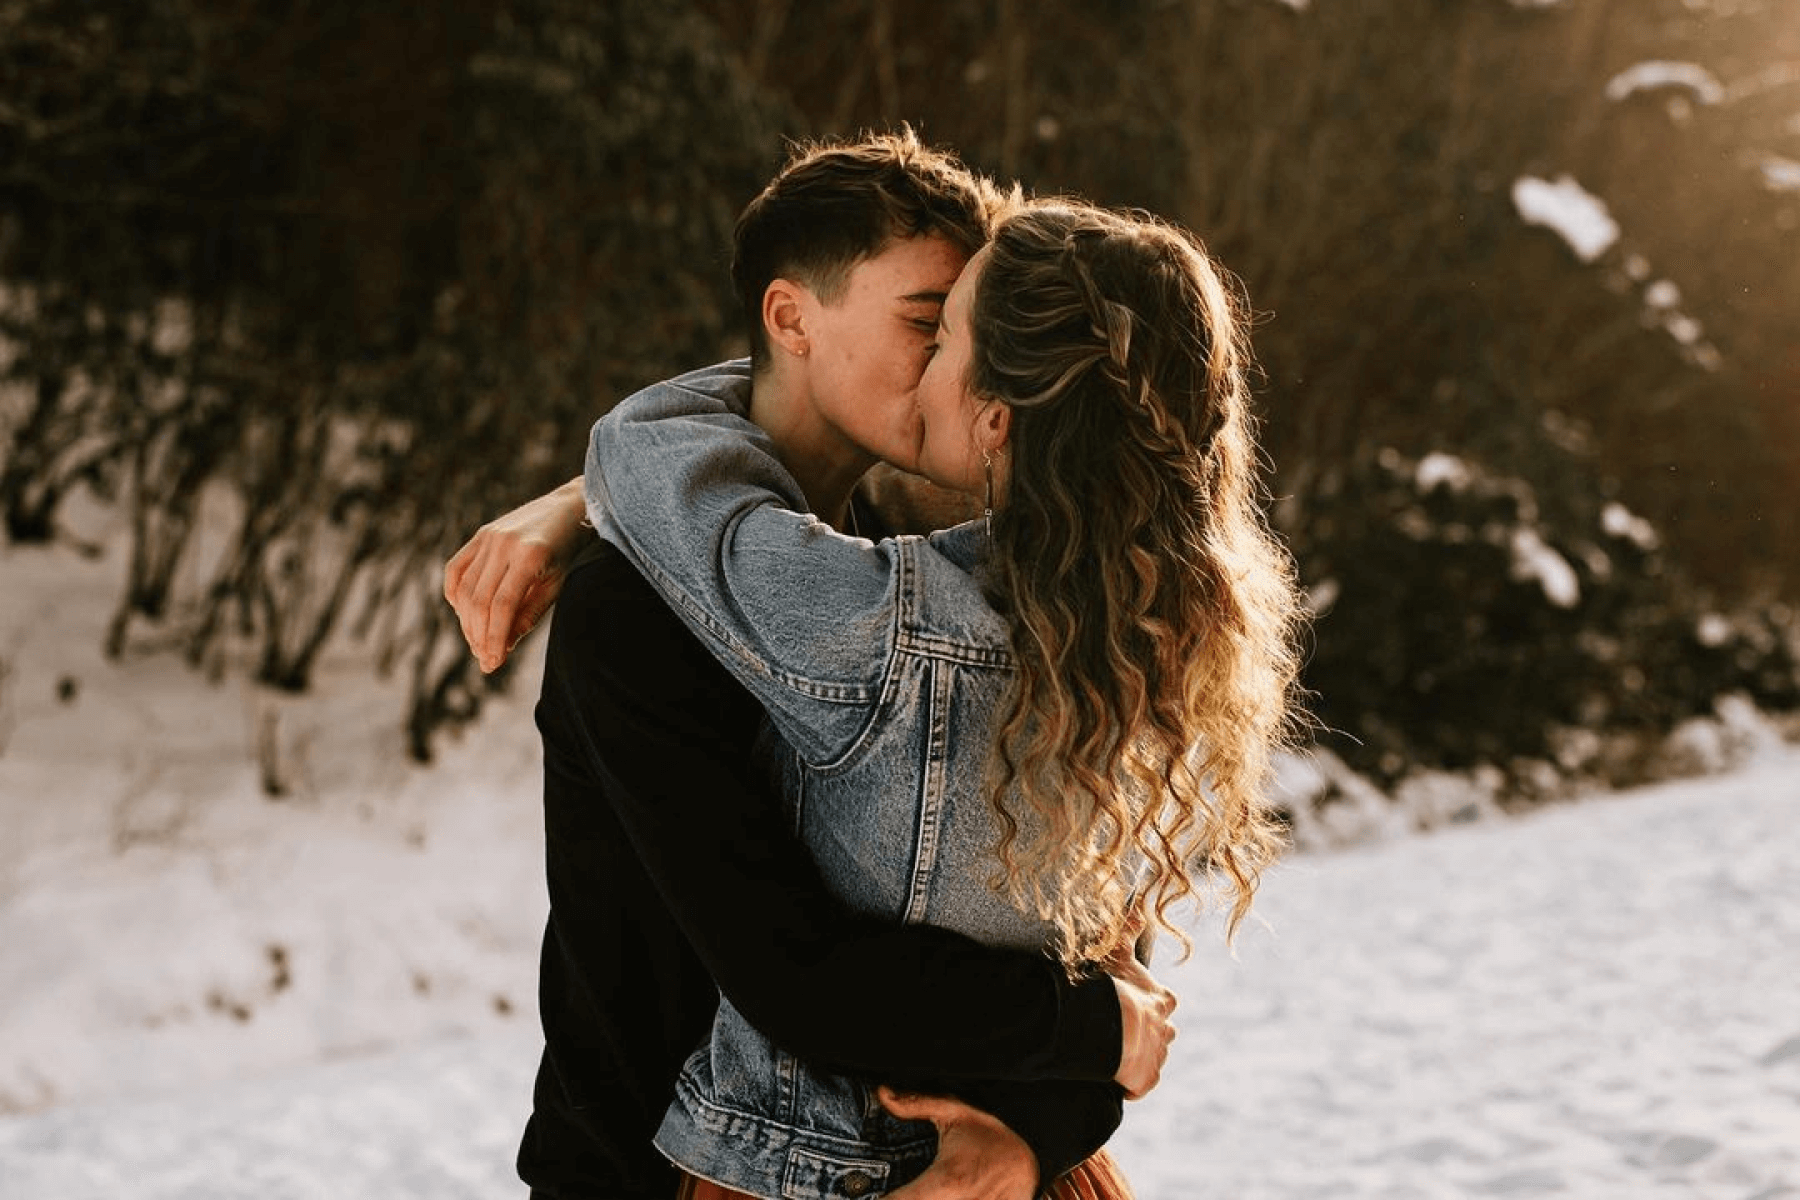 two people embrace and kiss in a snowy setting